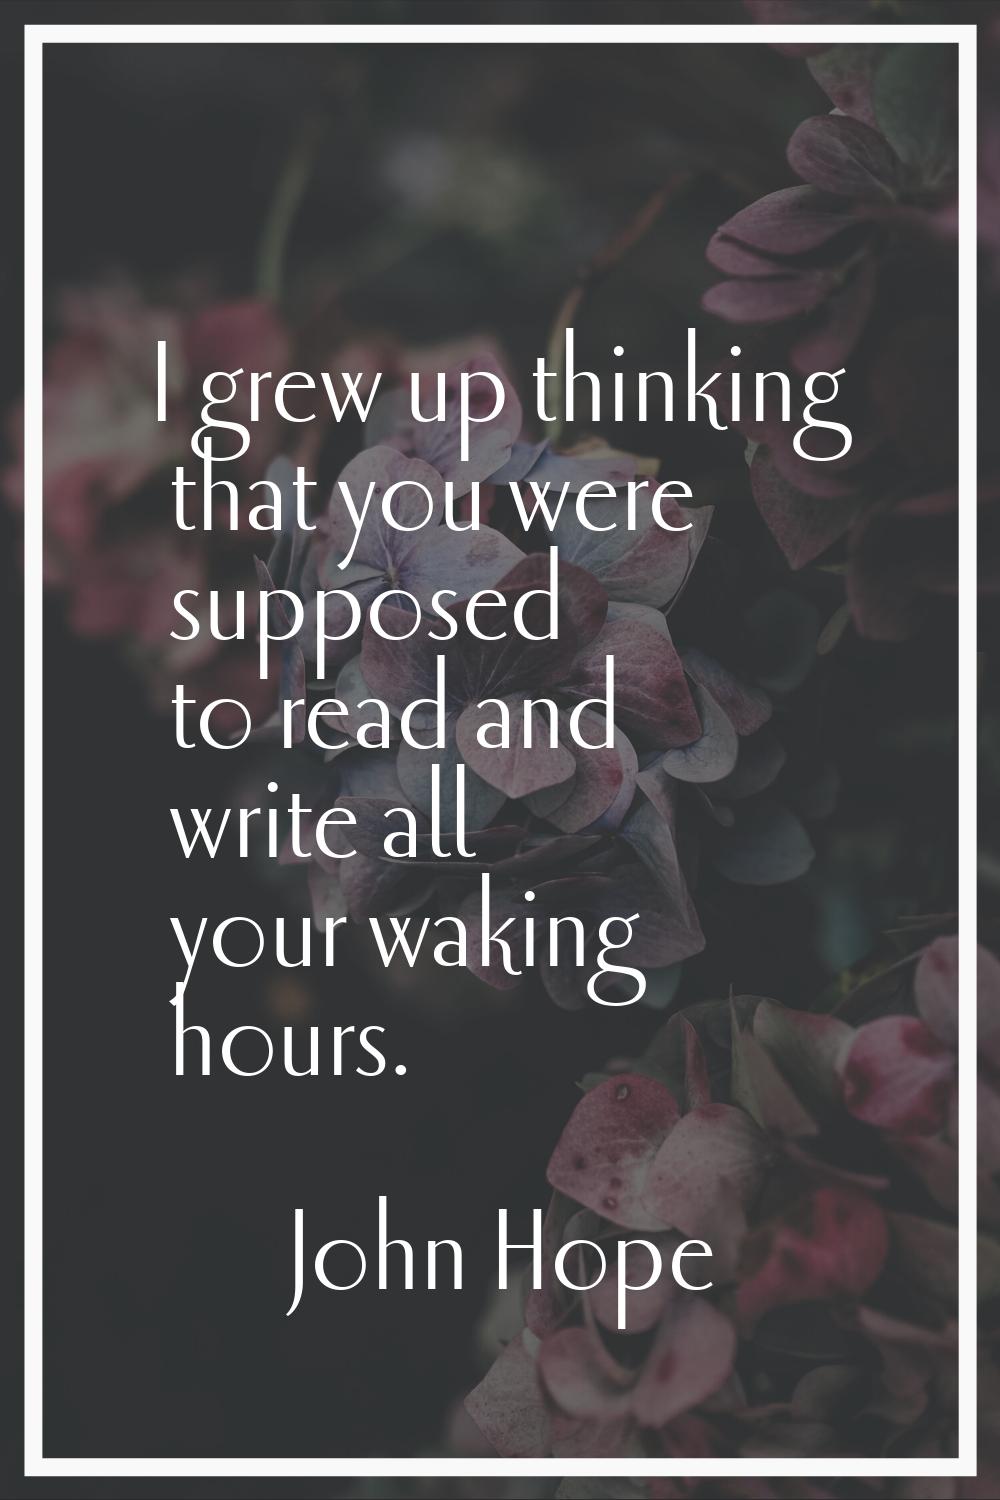 I grew up thinking that you were supposed to read and write all your waking hours.